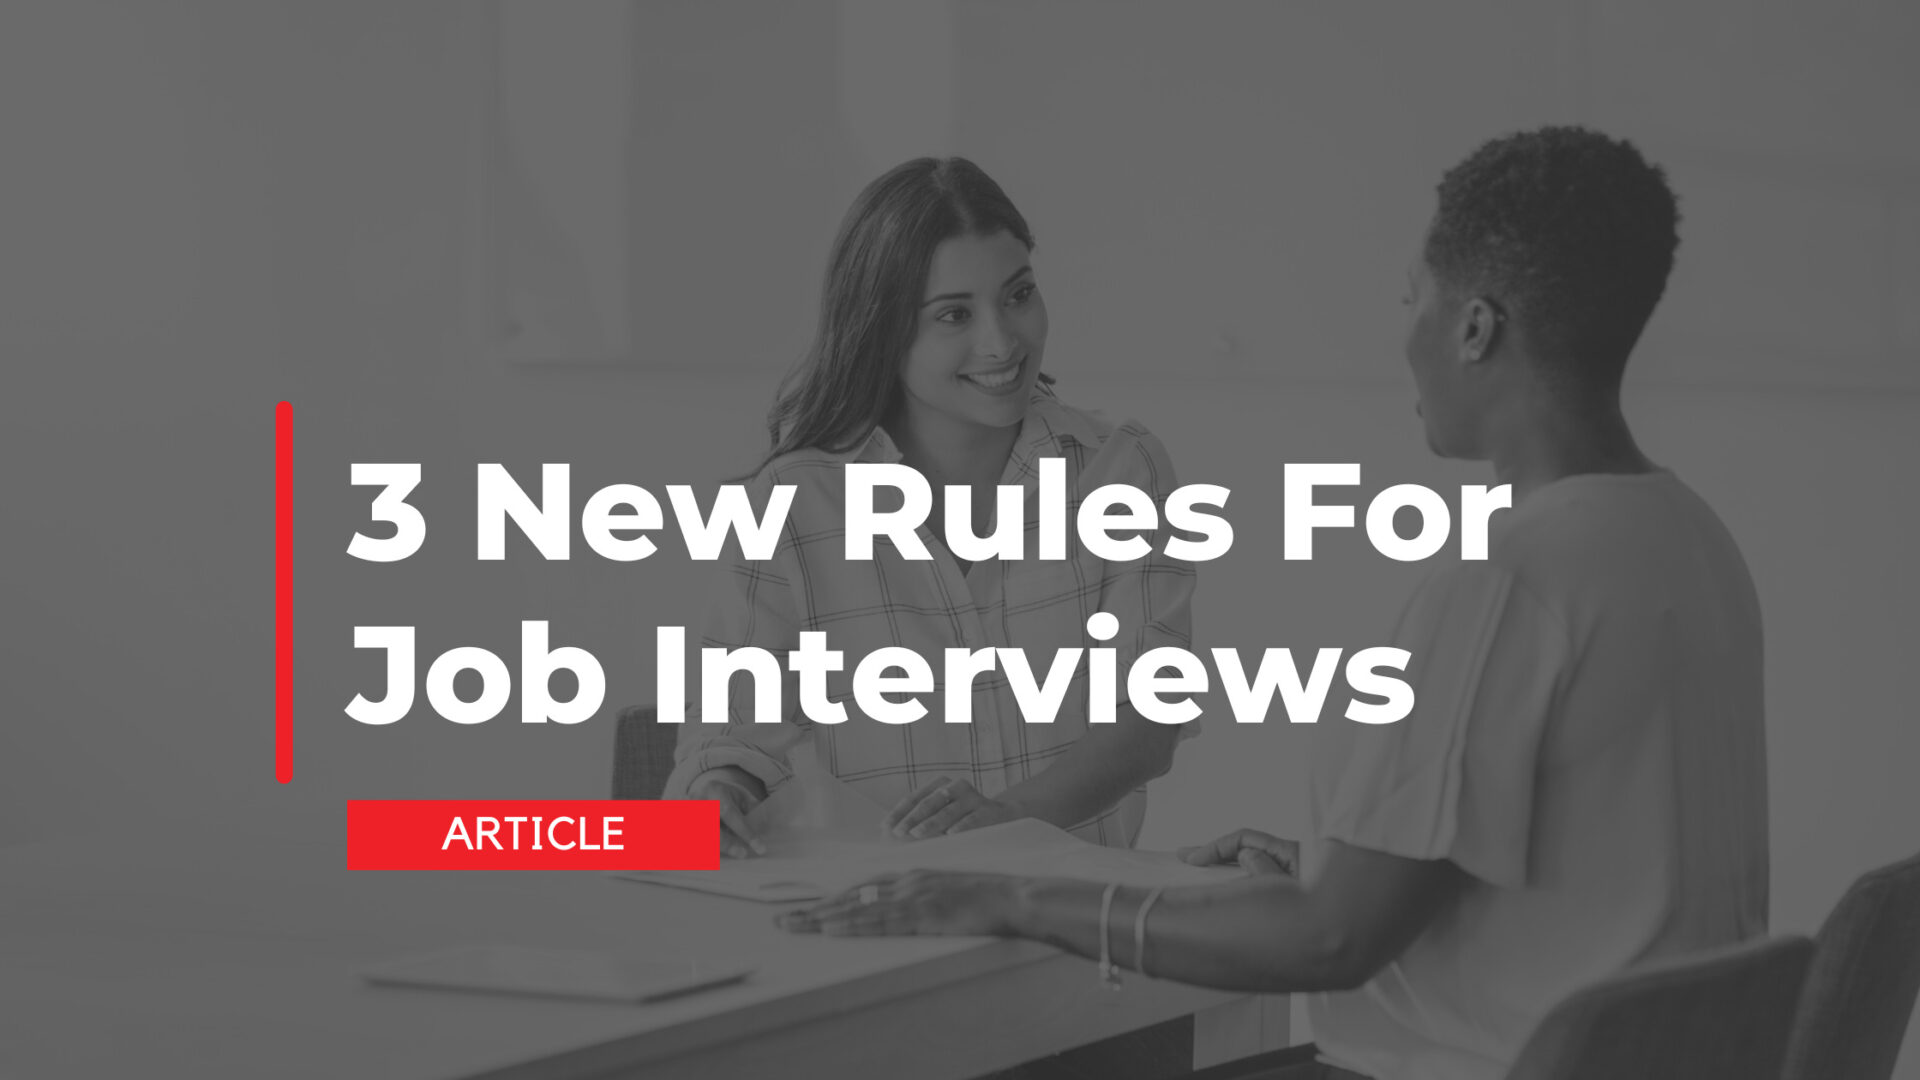 3 New Rules for Job Interviews